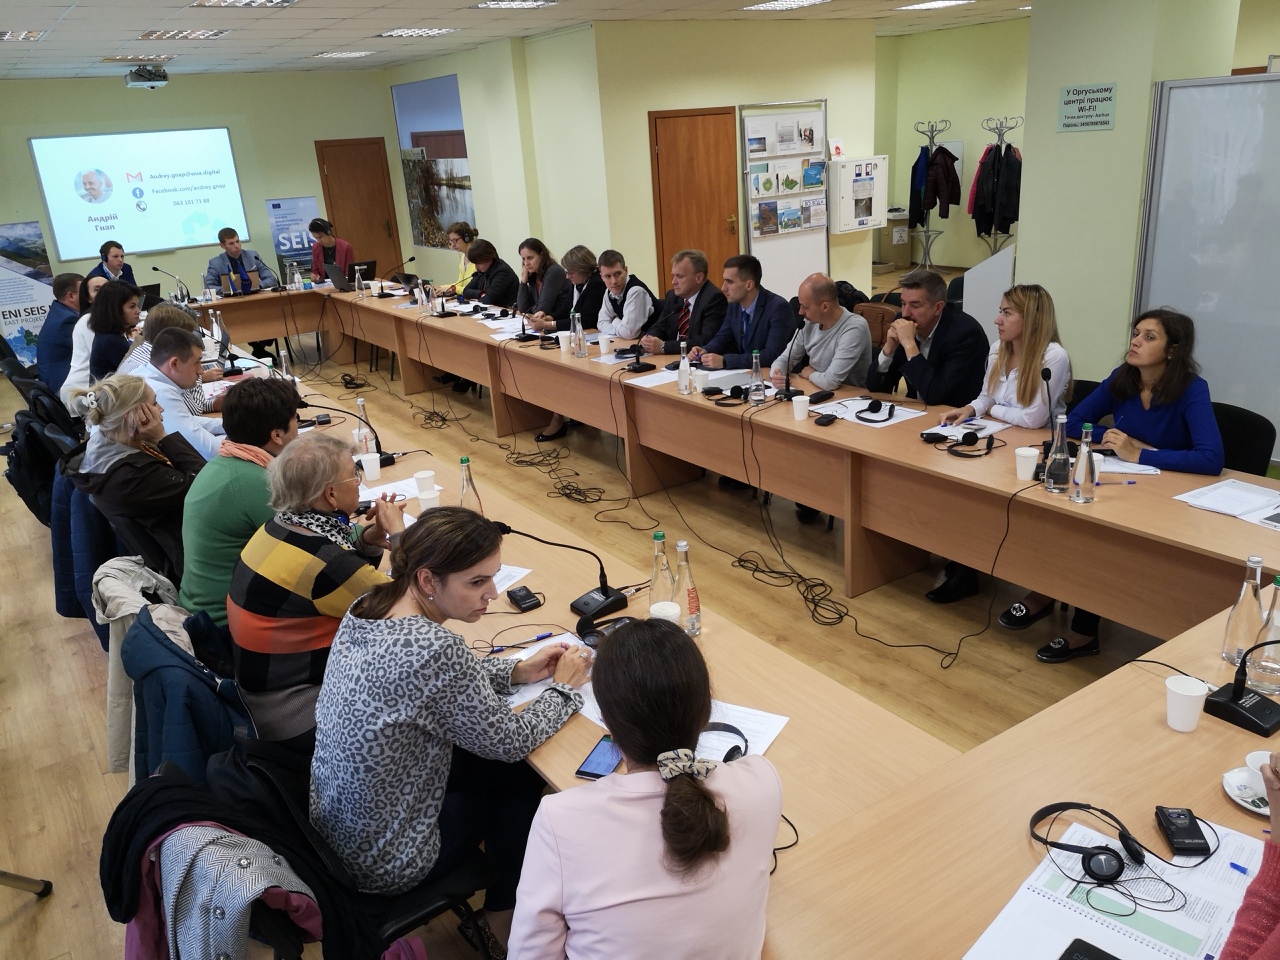 26 September 2019 | Round table on open data and e-government for the environment in Ukraine